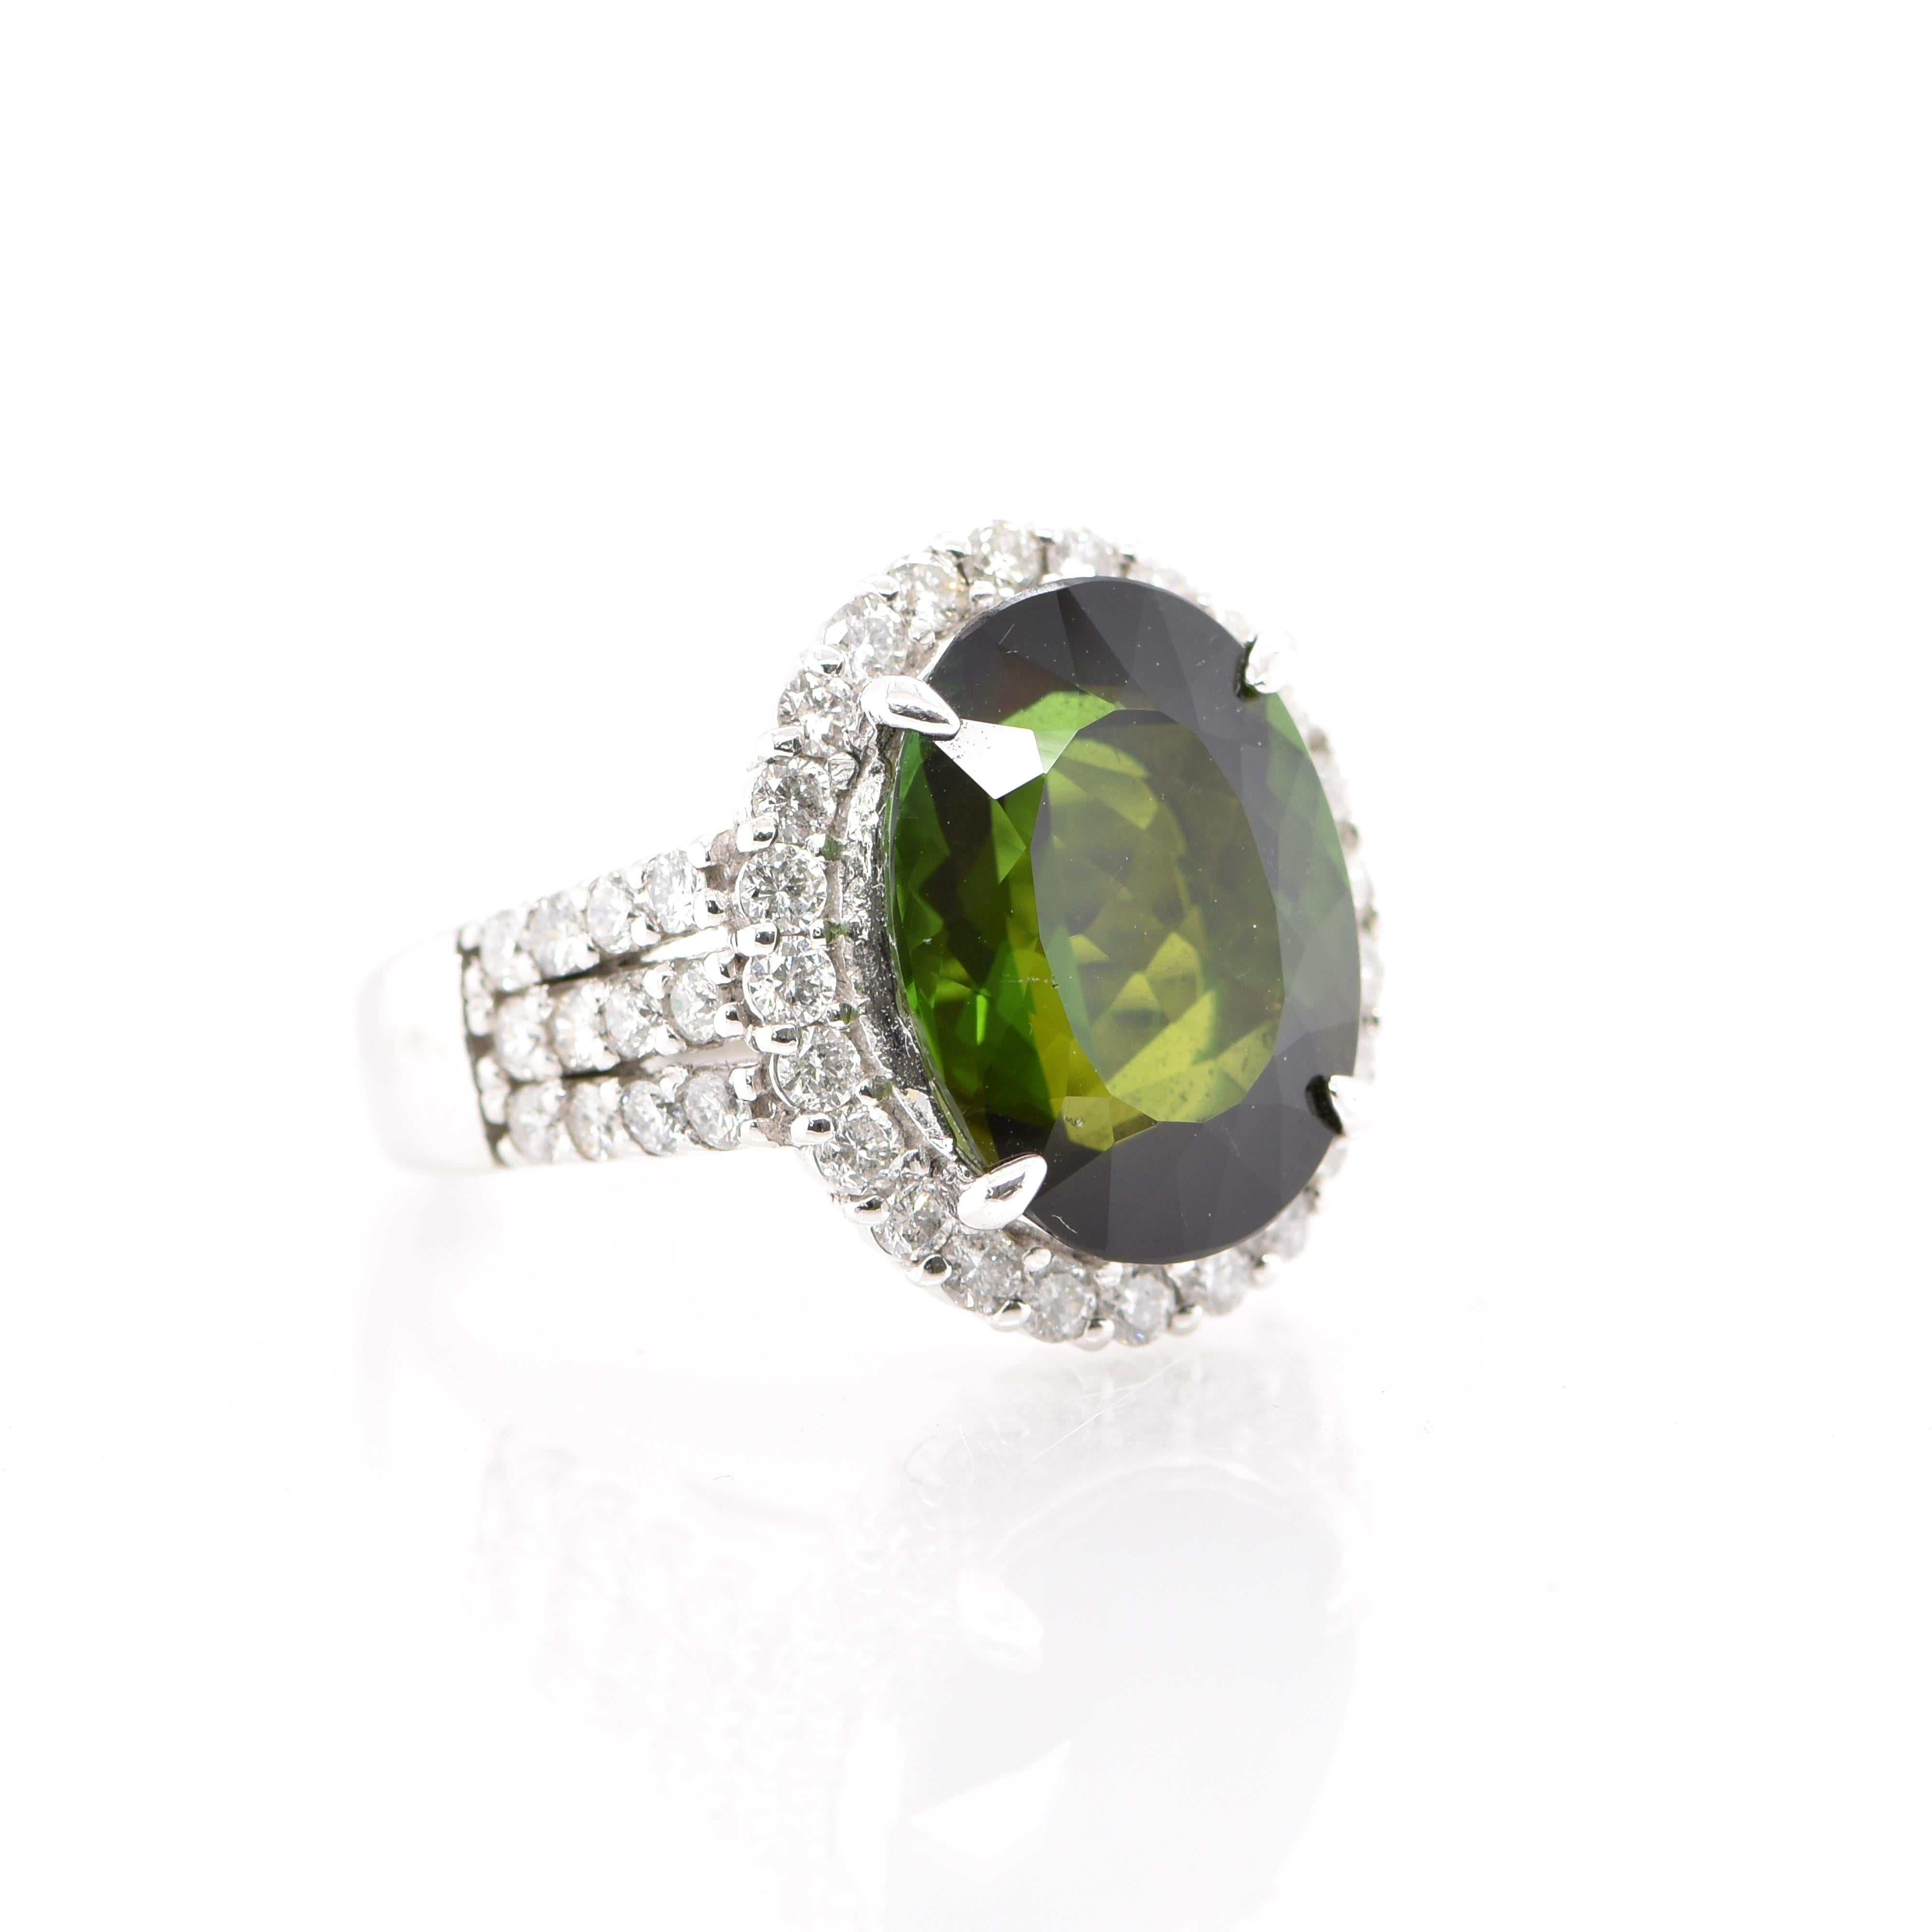 Oval Cut 8.43 Carat Green Tourmaline and Diamond Cocktail Ring Set in Platinum